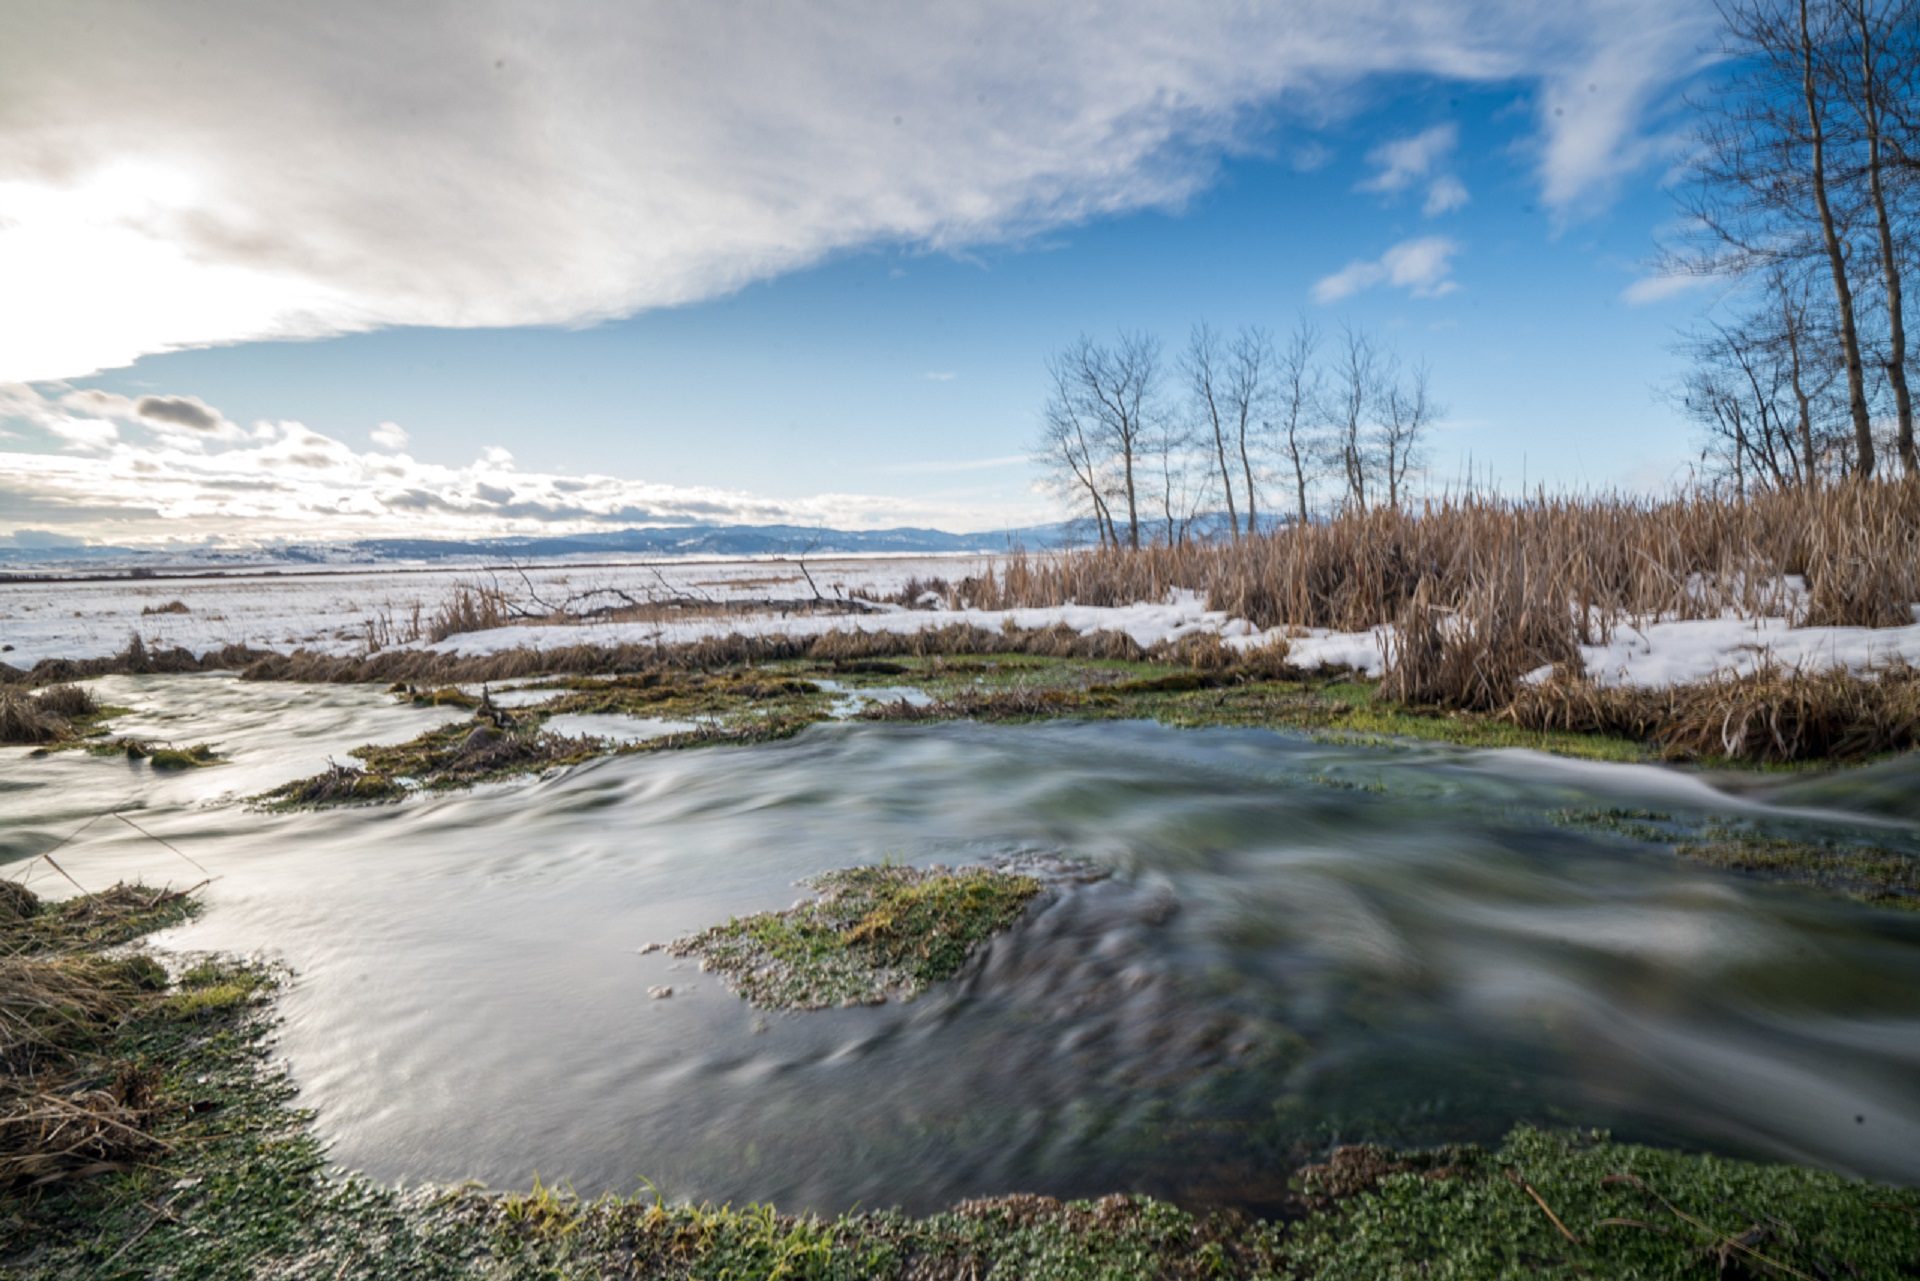 Nevada Spring Creek was once cut off to irrigate a ranch in the Blackfoot Valley. Now, through a restoration effort involving a wetland mitigation bank, its natural connectivity has been restored.